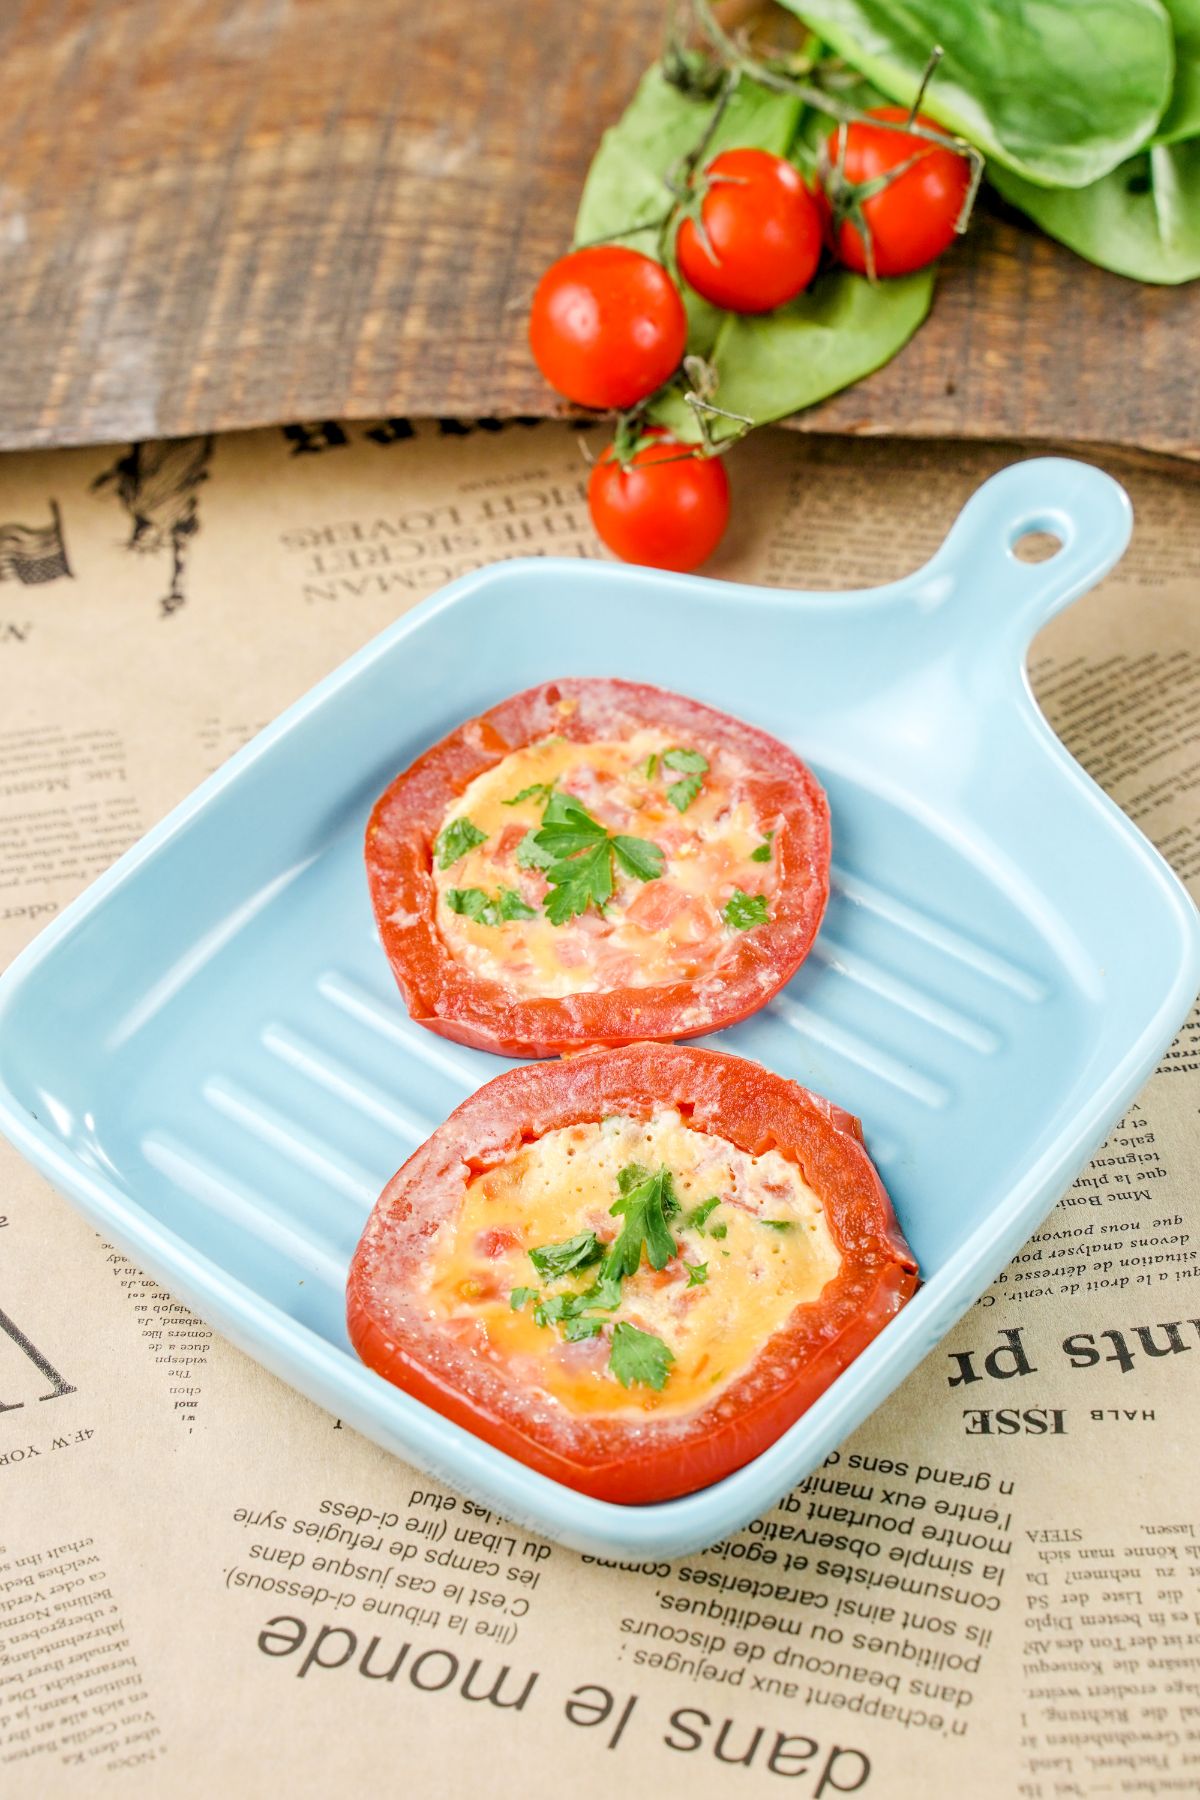 square blue grill pan on newspaper holding tomato egg slices